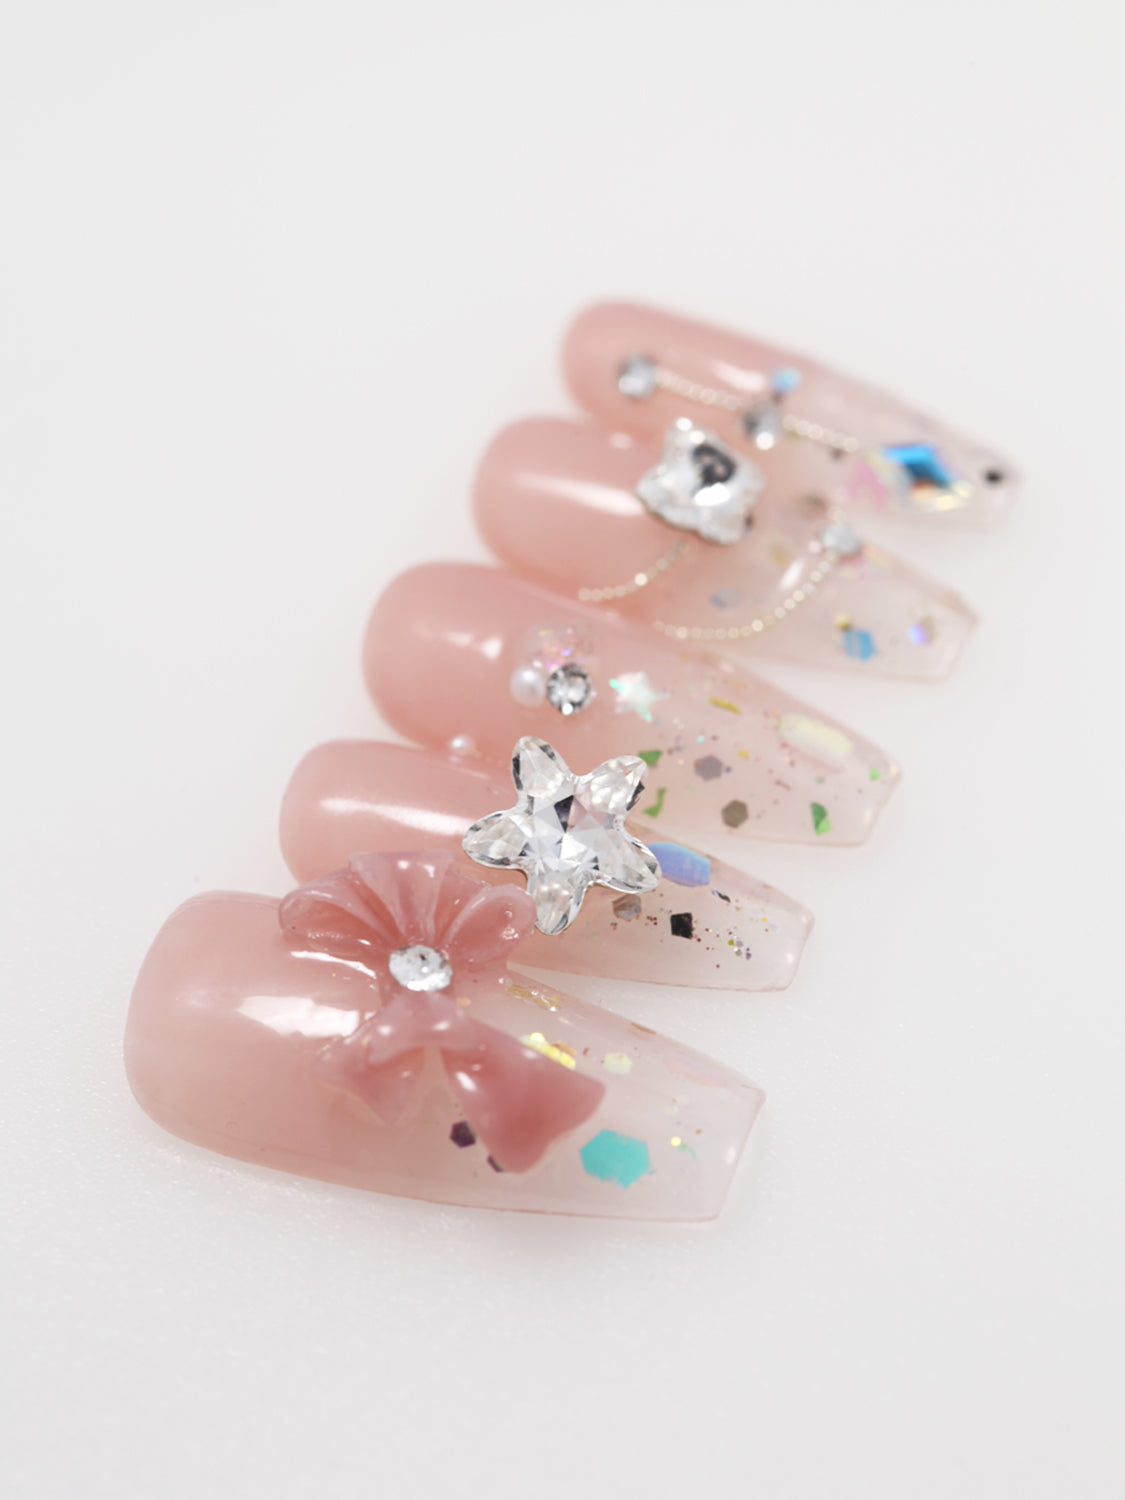 MIEAP summer candy press on nail for a burst of sweet, colorful vibes! This set features a peachy pink to transparent ombre with holographic glitter and handcrafted Swarovski rhinestones. Perfect for your sunny days. #MIEAPnails #pressonnail #acrylicnail #nails #nailart #naildesign #nailinspo #handmadenail #summernail #nail2023 #graduationnail #swarovskinail  #datingnail #promnail